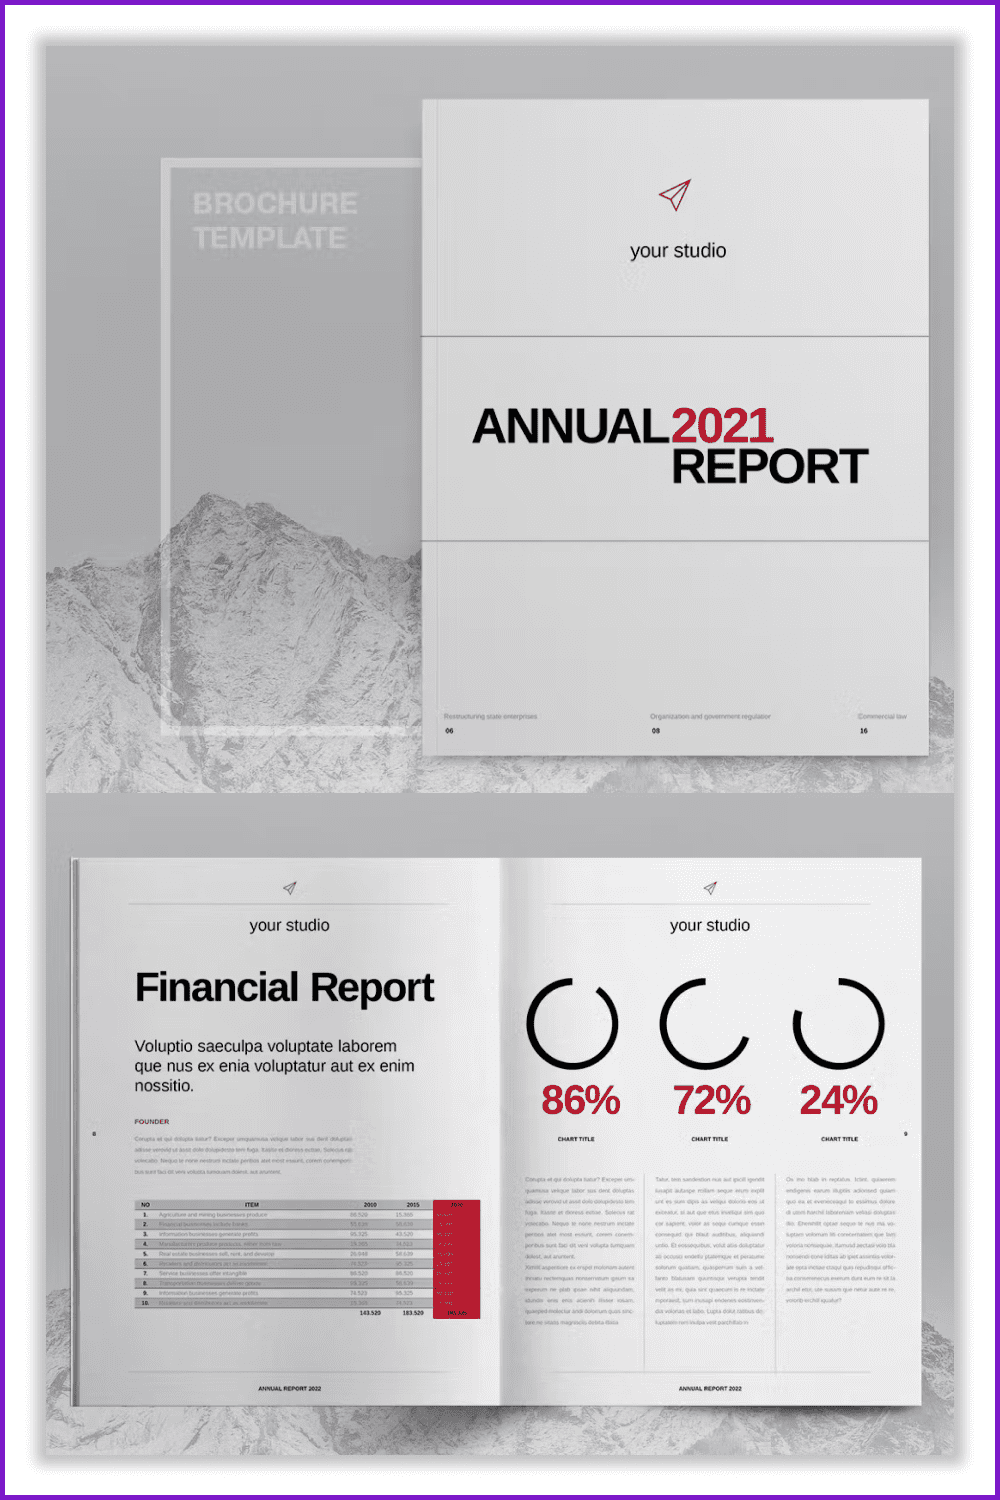 Collage of Annual report pages with round infographic.